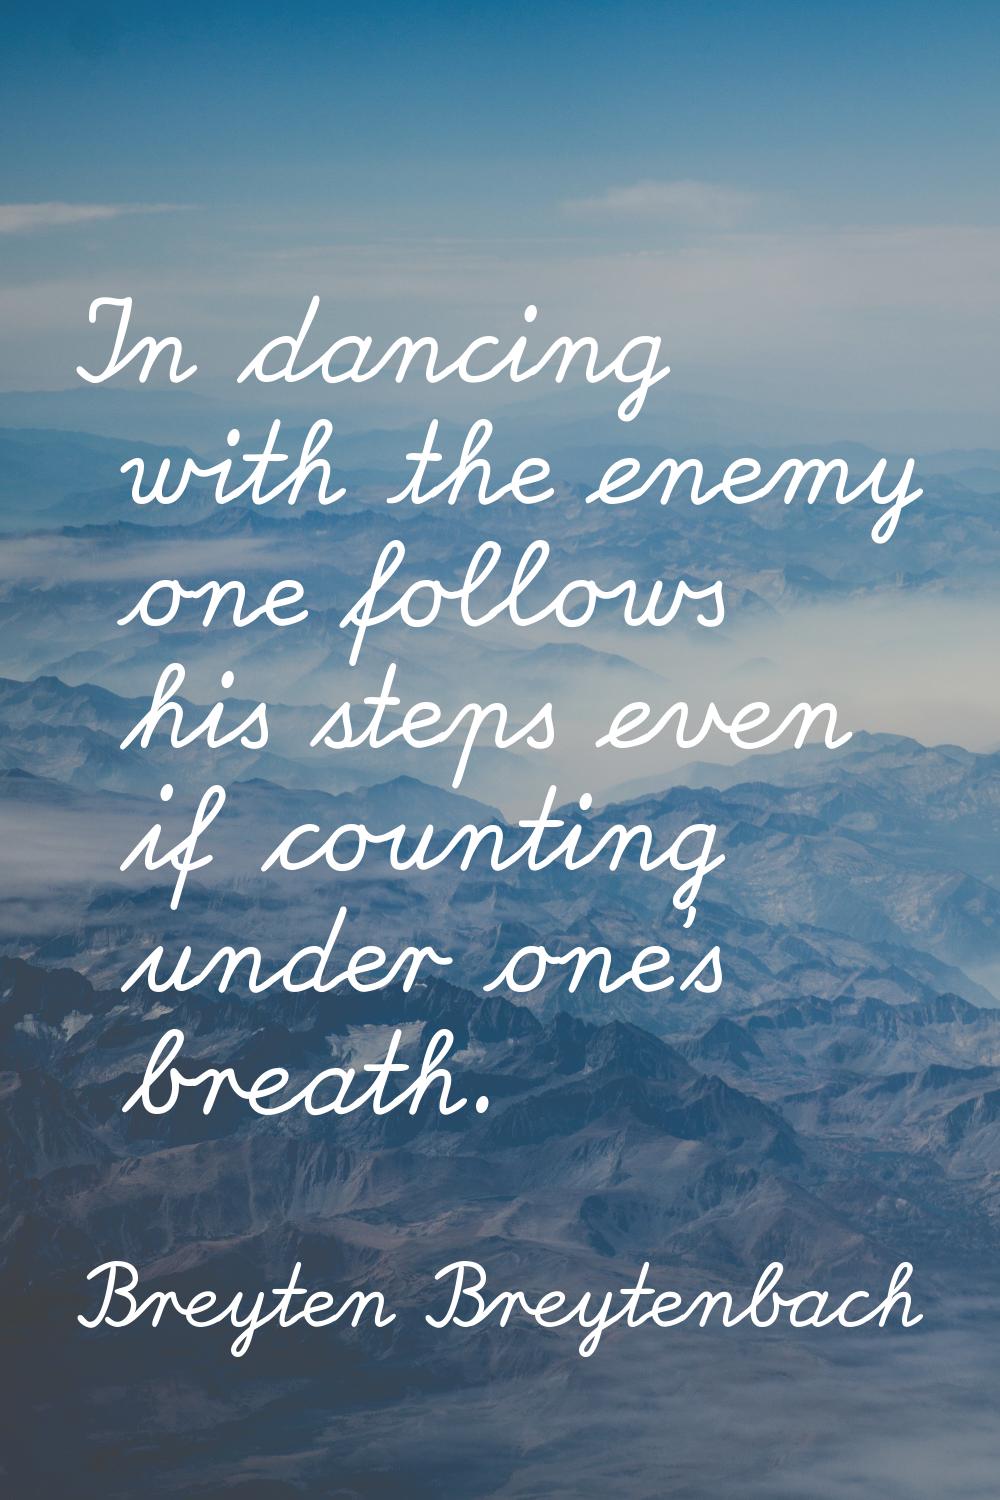 In dancing with the enemy one follows his steps even if counting under one's breath.